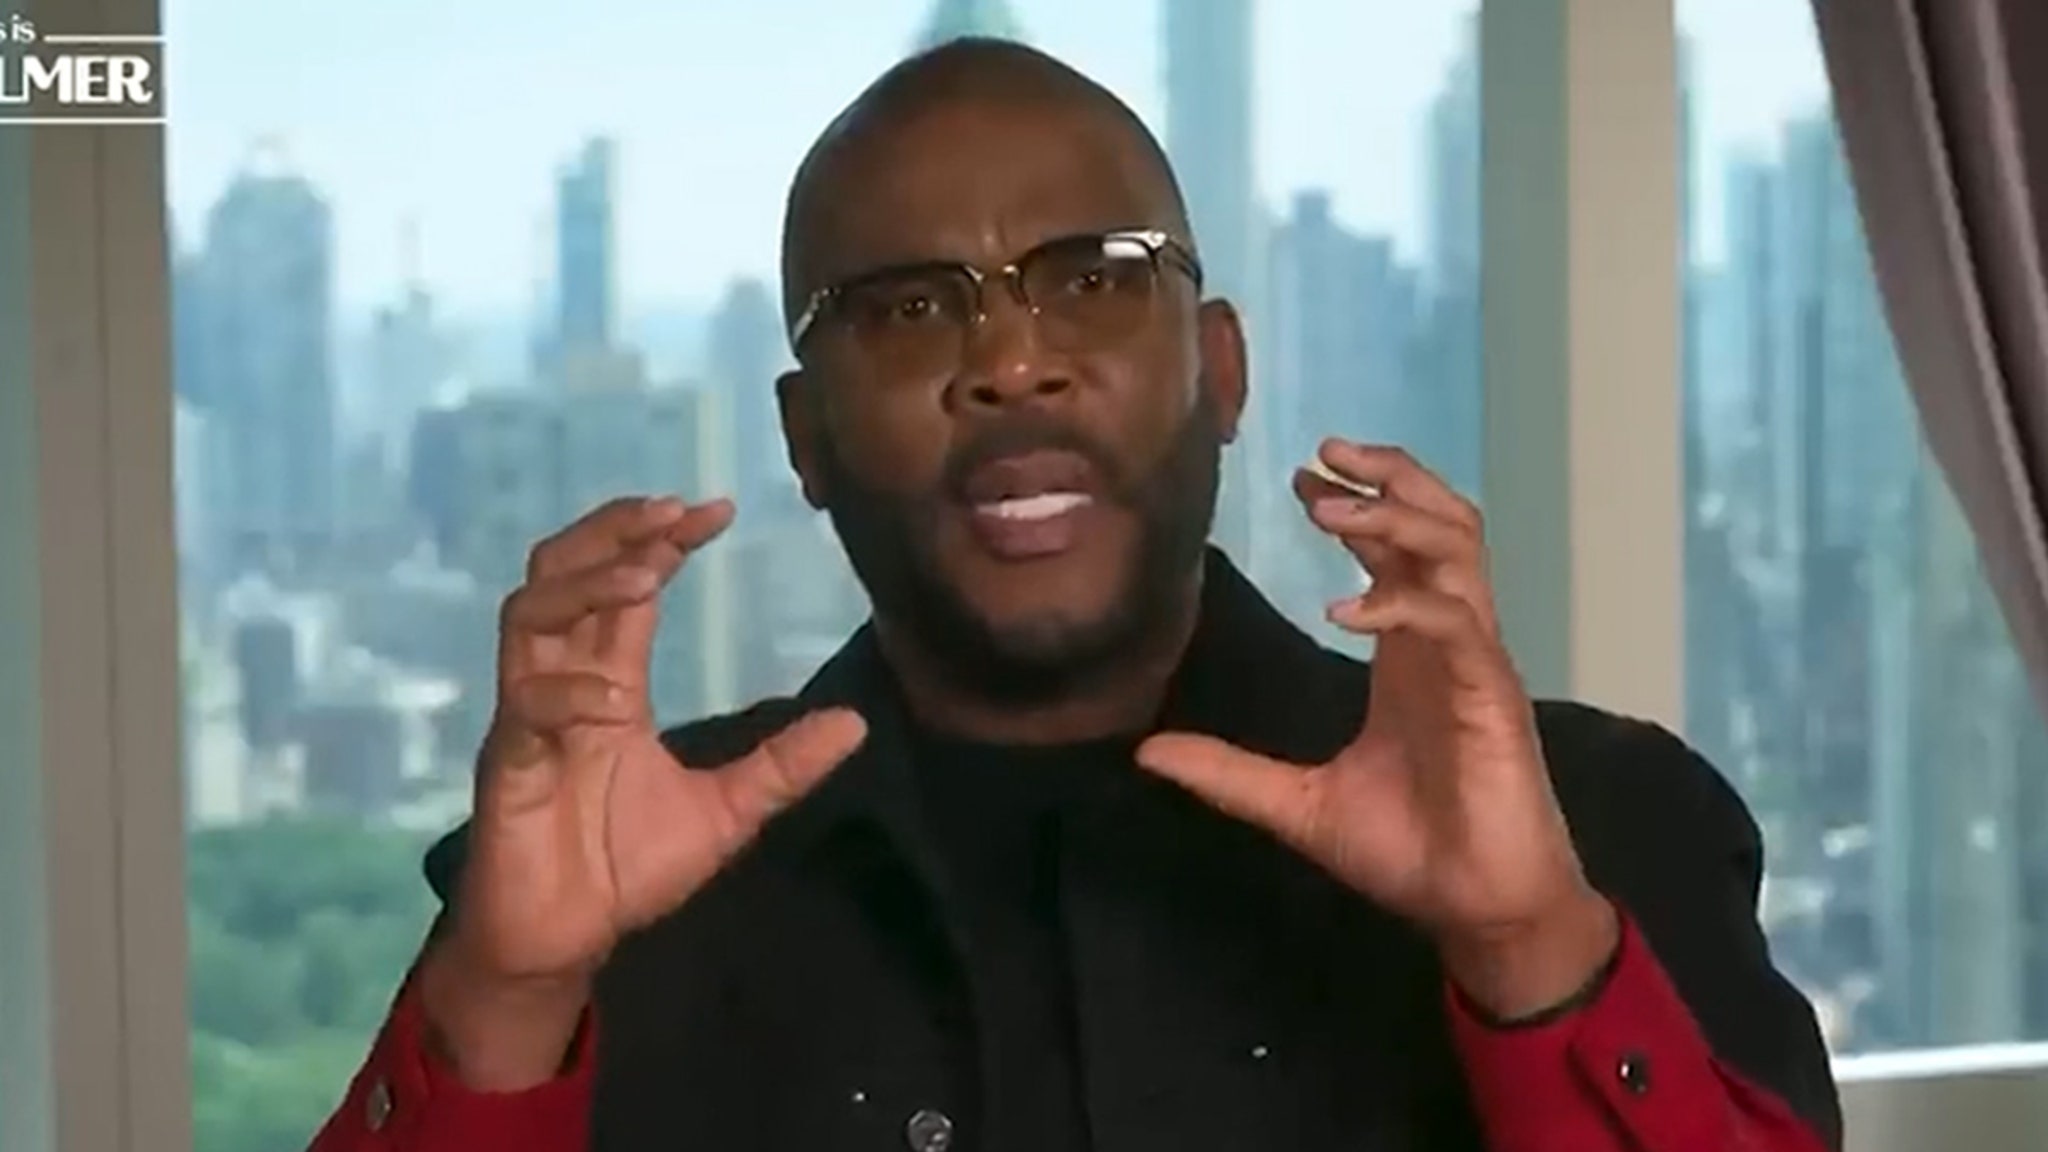 Tyler Perry Calls Out 'Highbrow Negro' For Criticizing His Movies